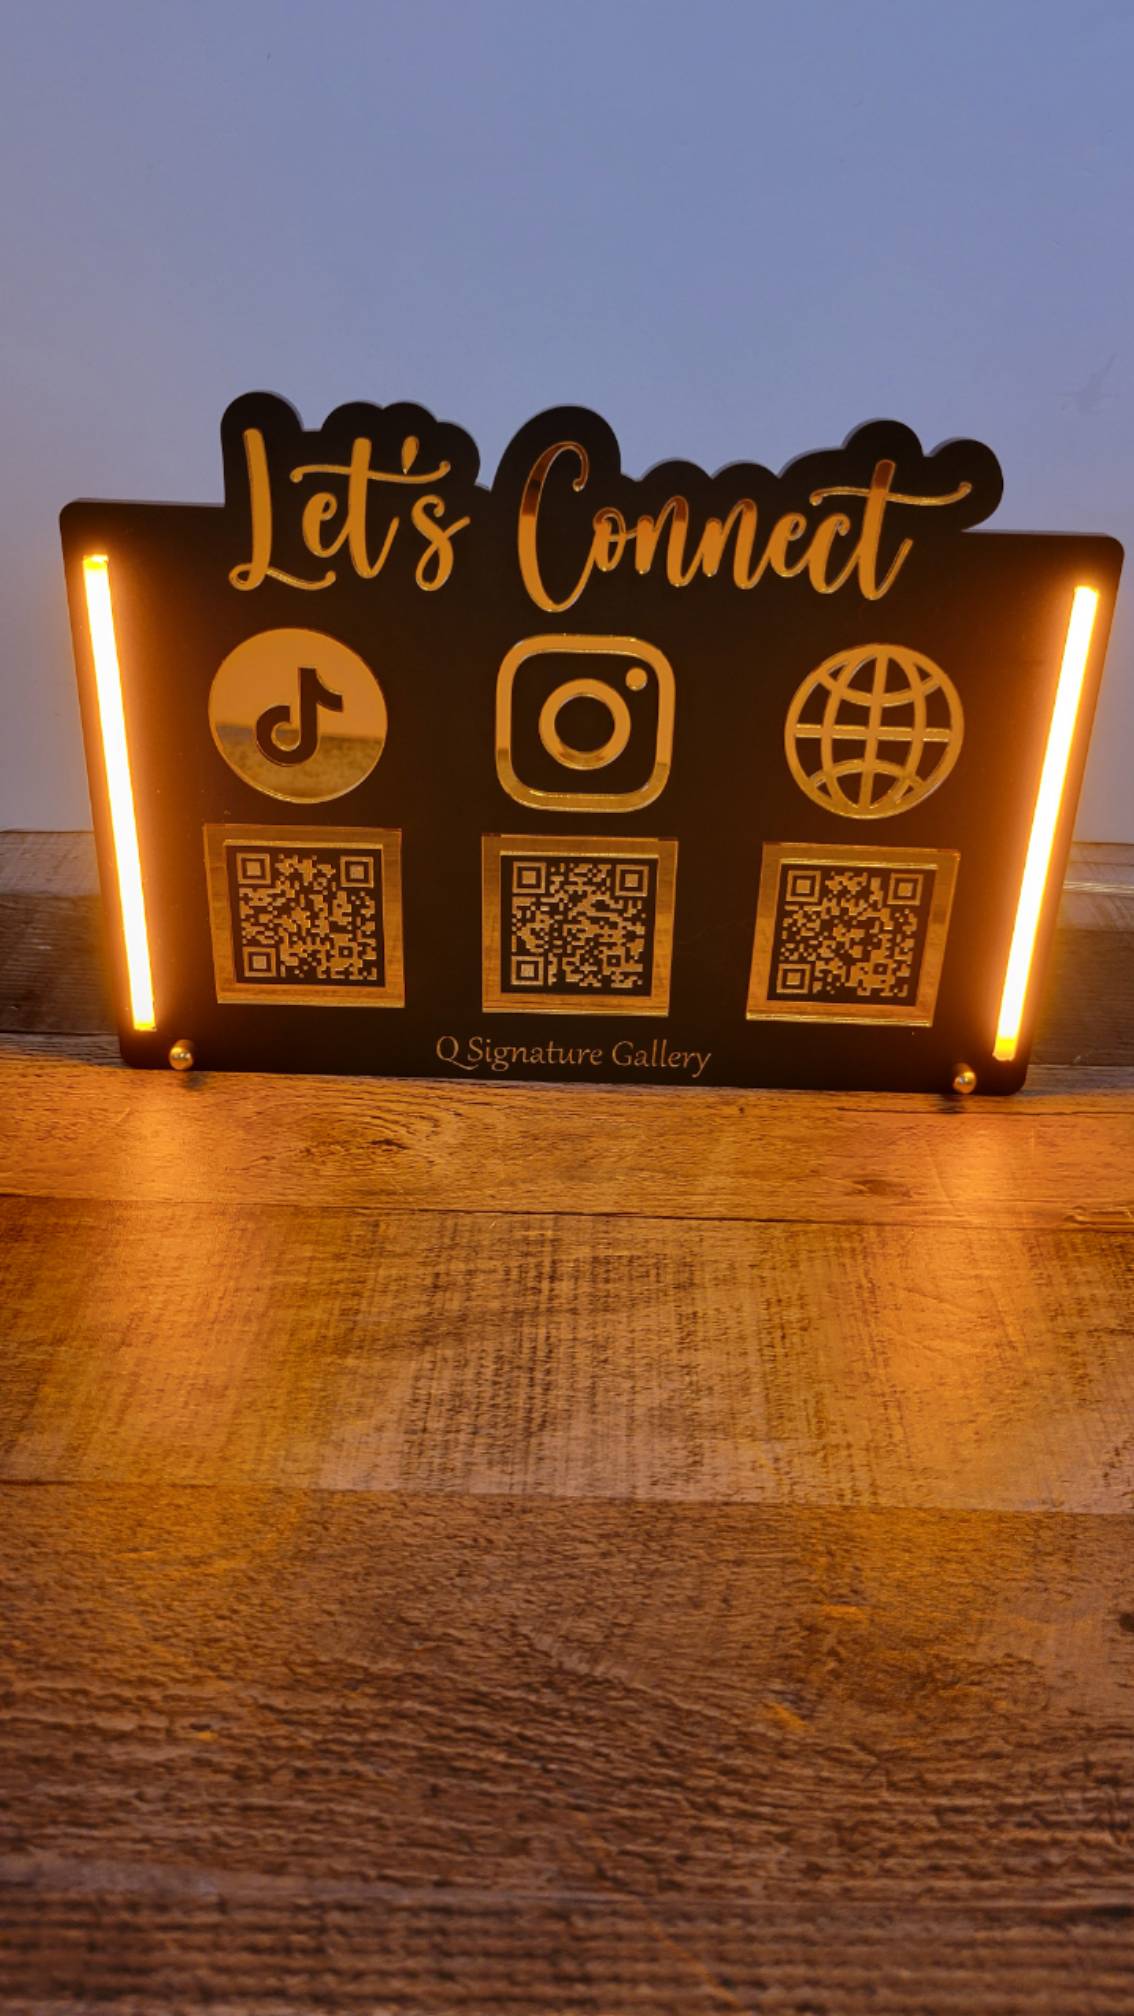 Let's Connect LED Sign with black background, gold lights and gold icons